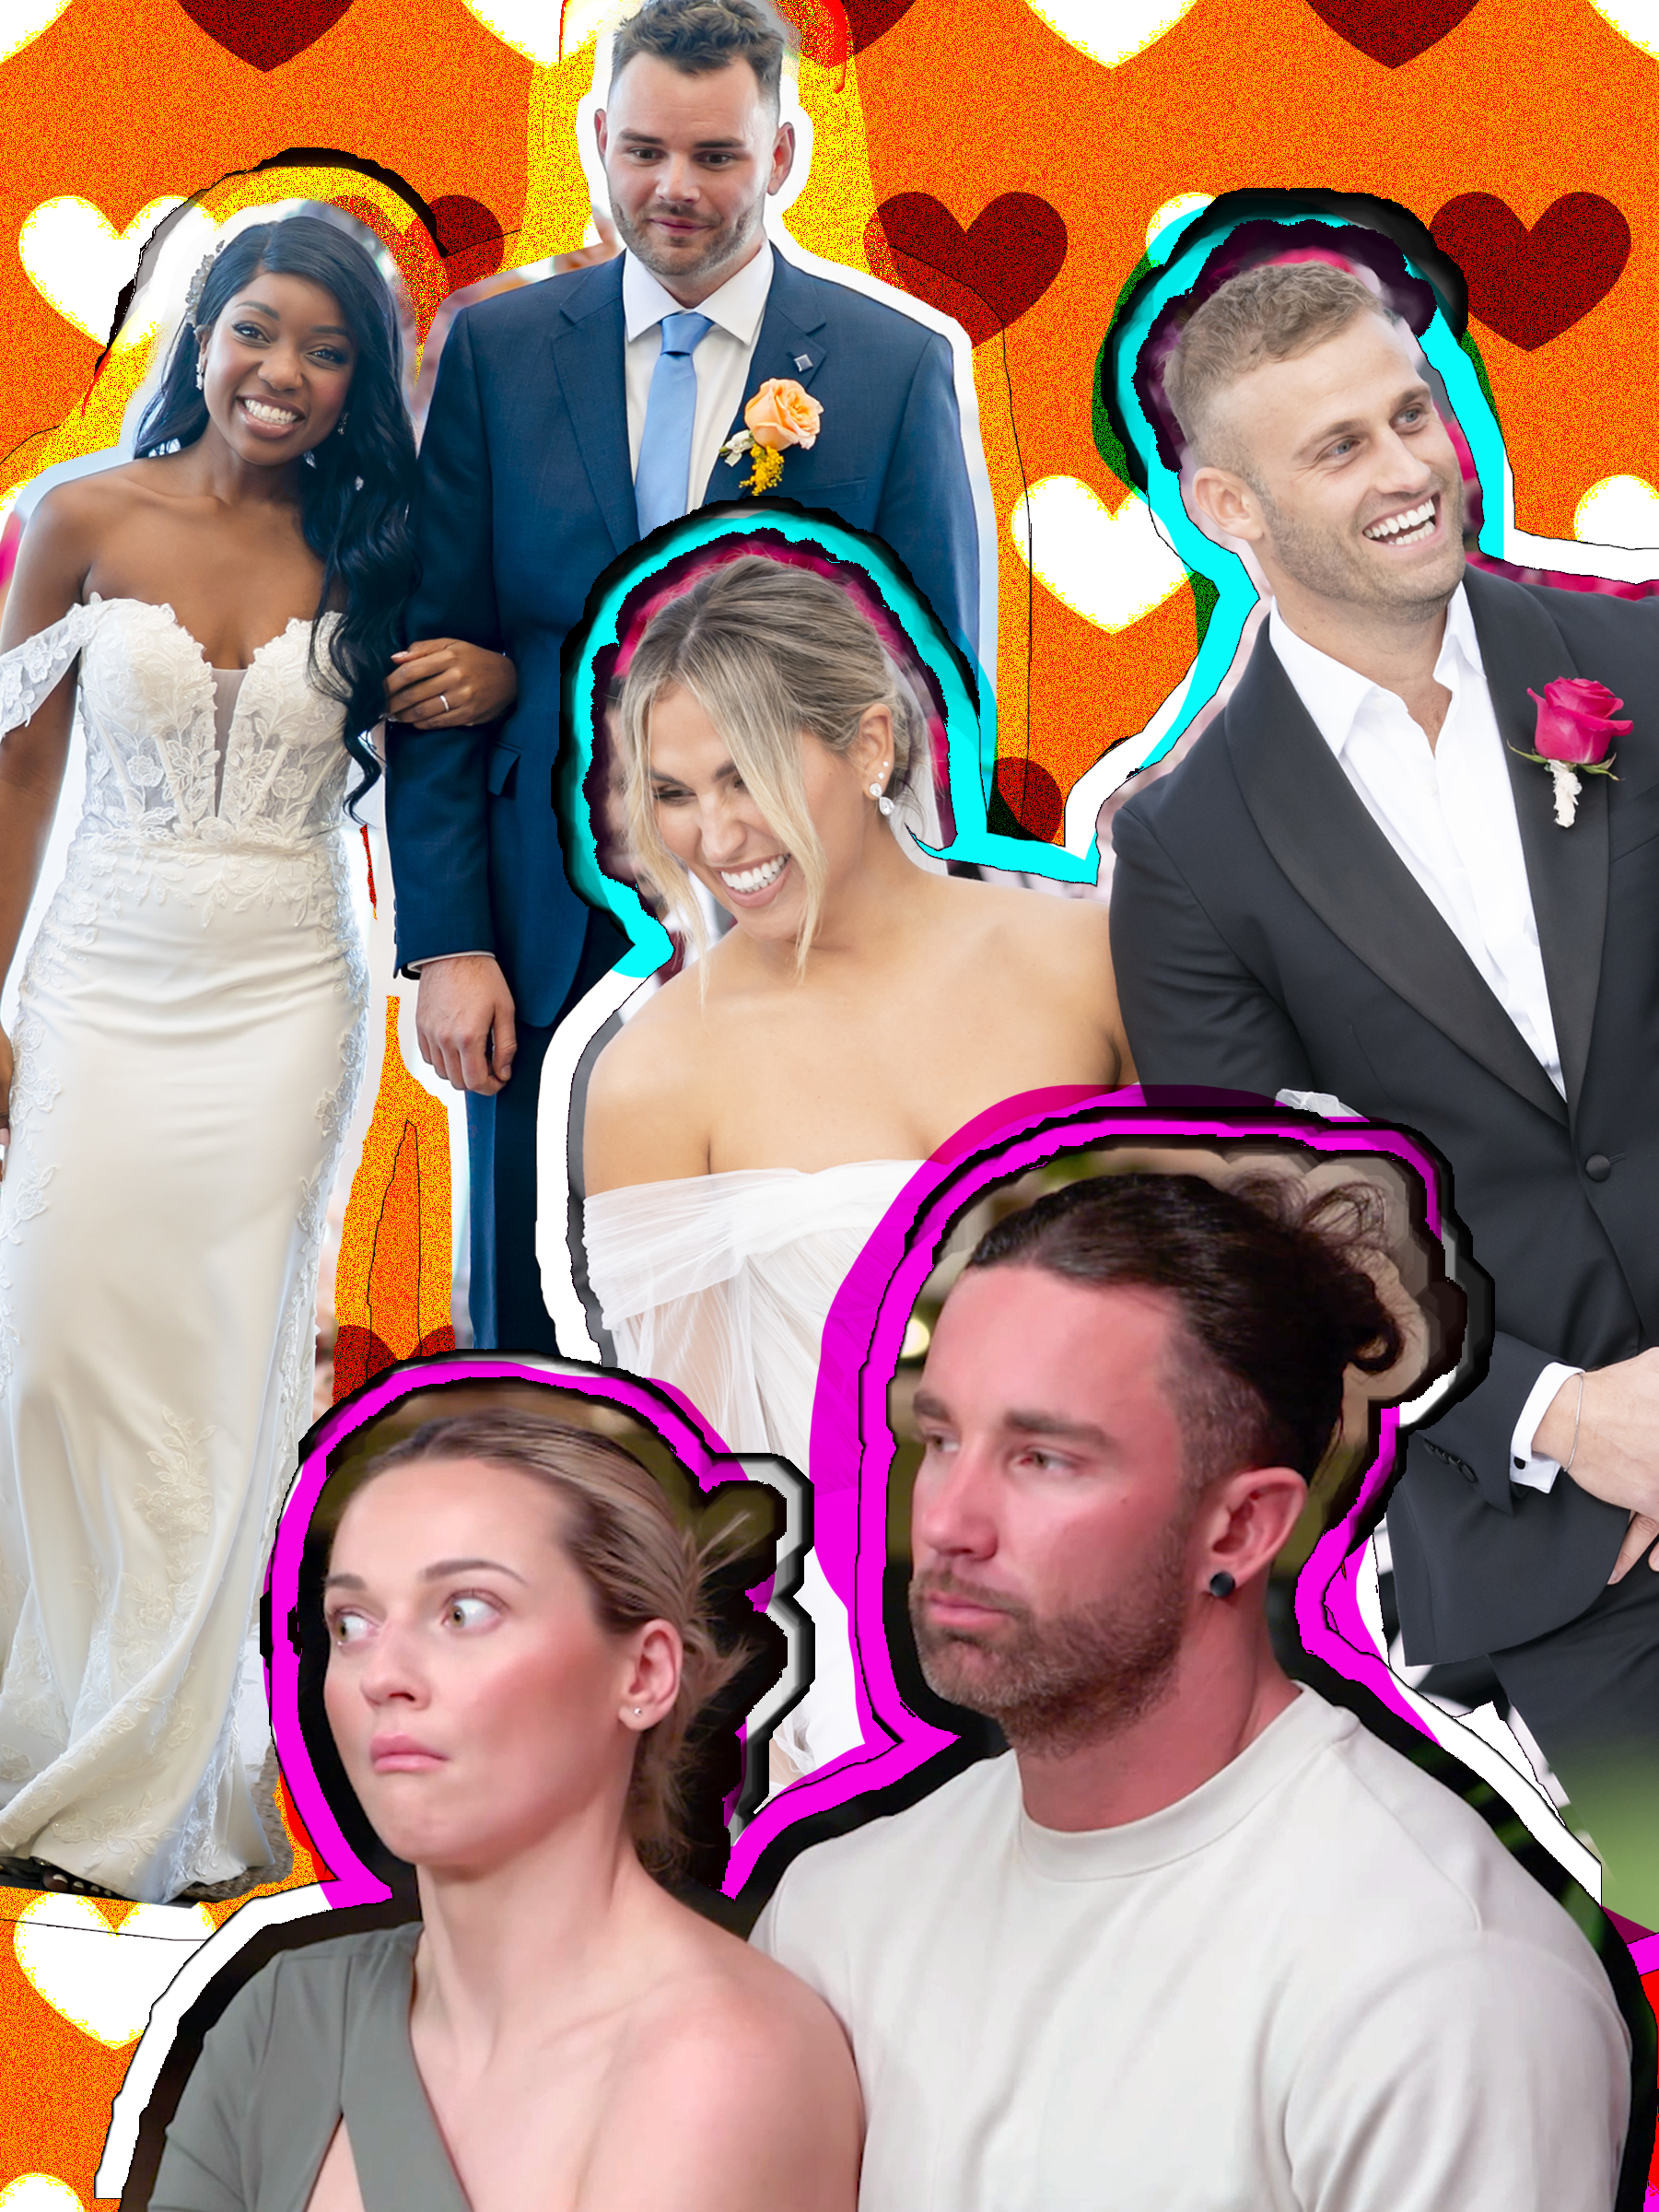 The Top 7 Must-Watch Seasons of 'Married at First Sight